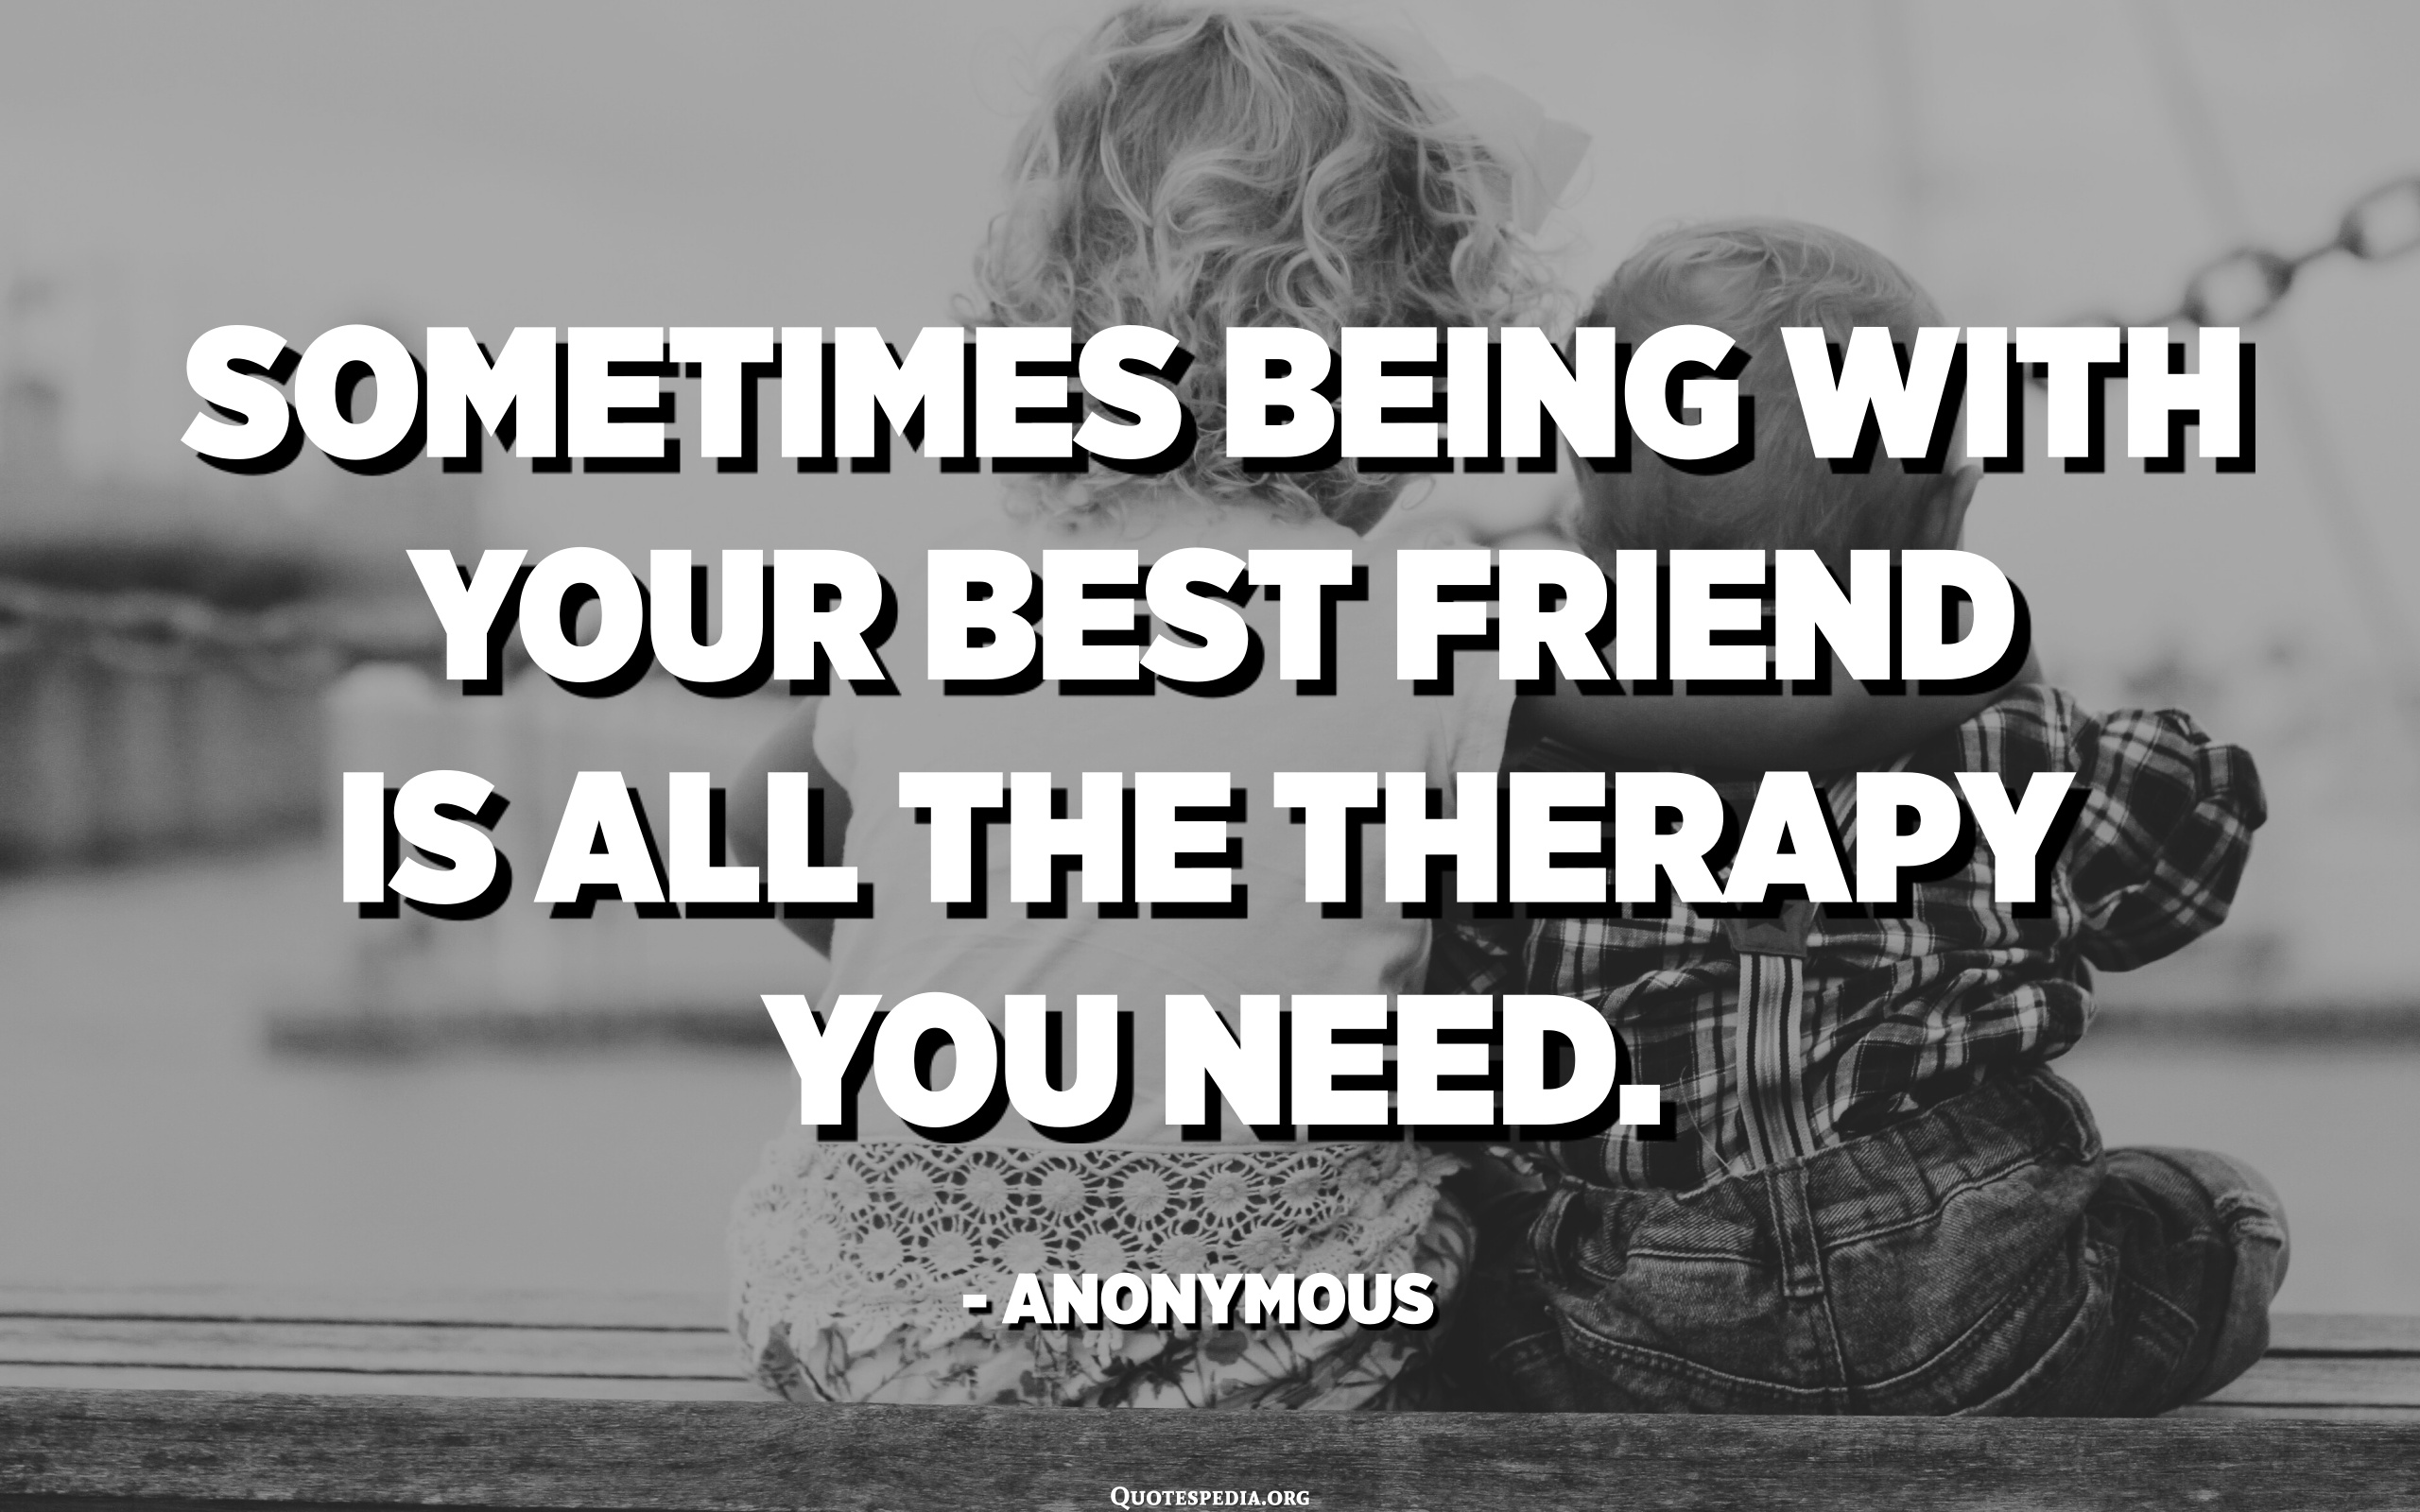 Sometimes being with your best friend is all the therapy you need